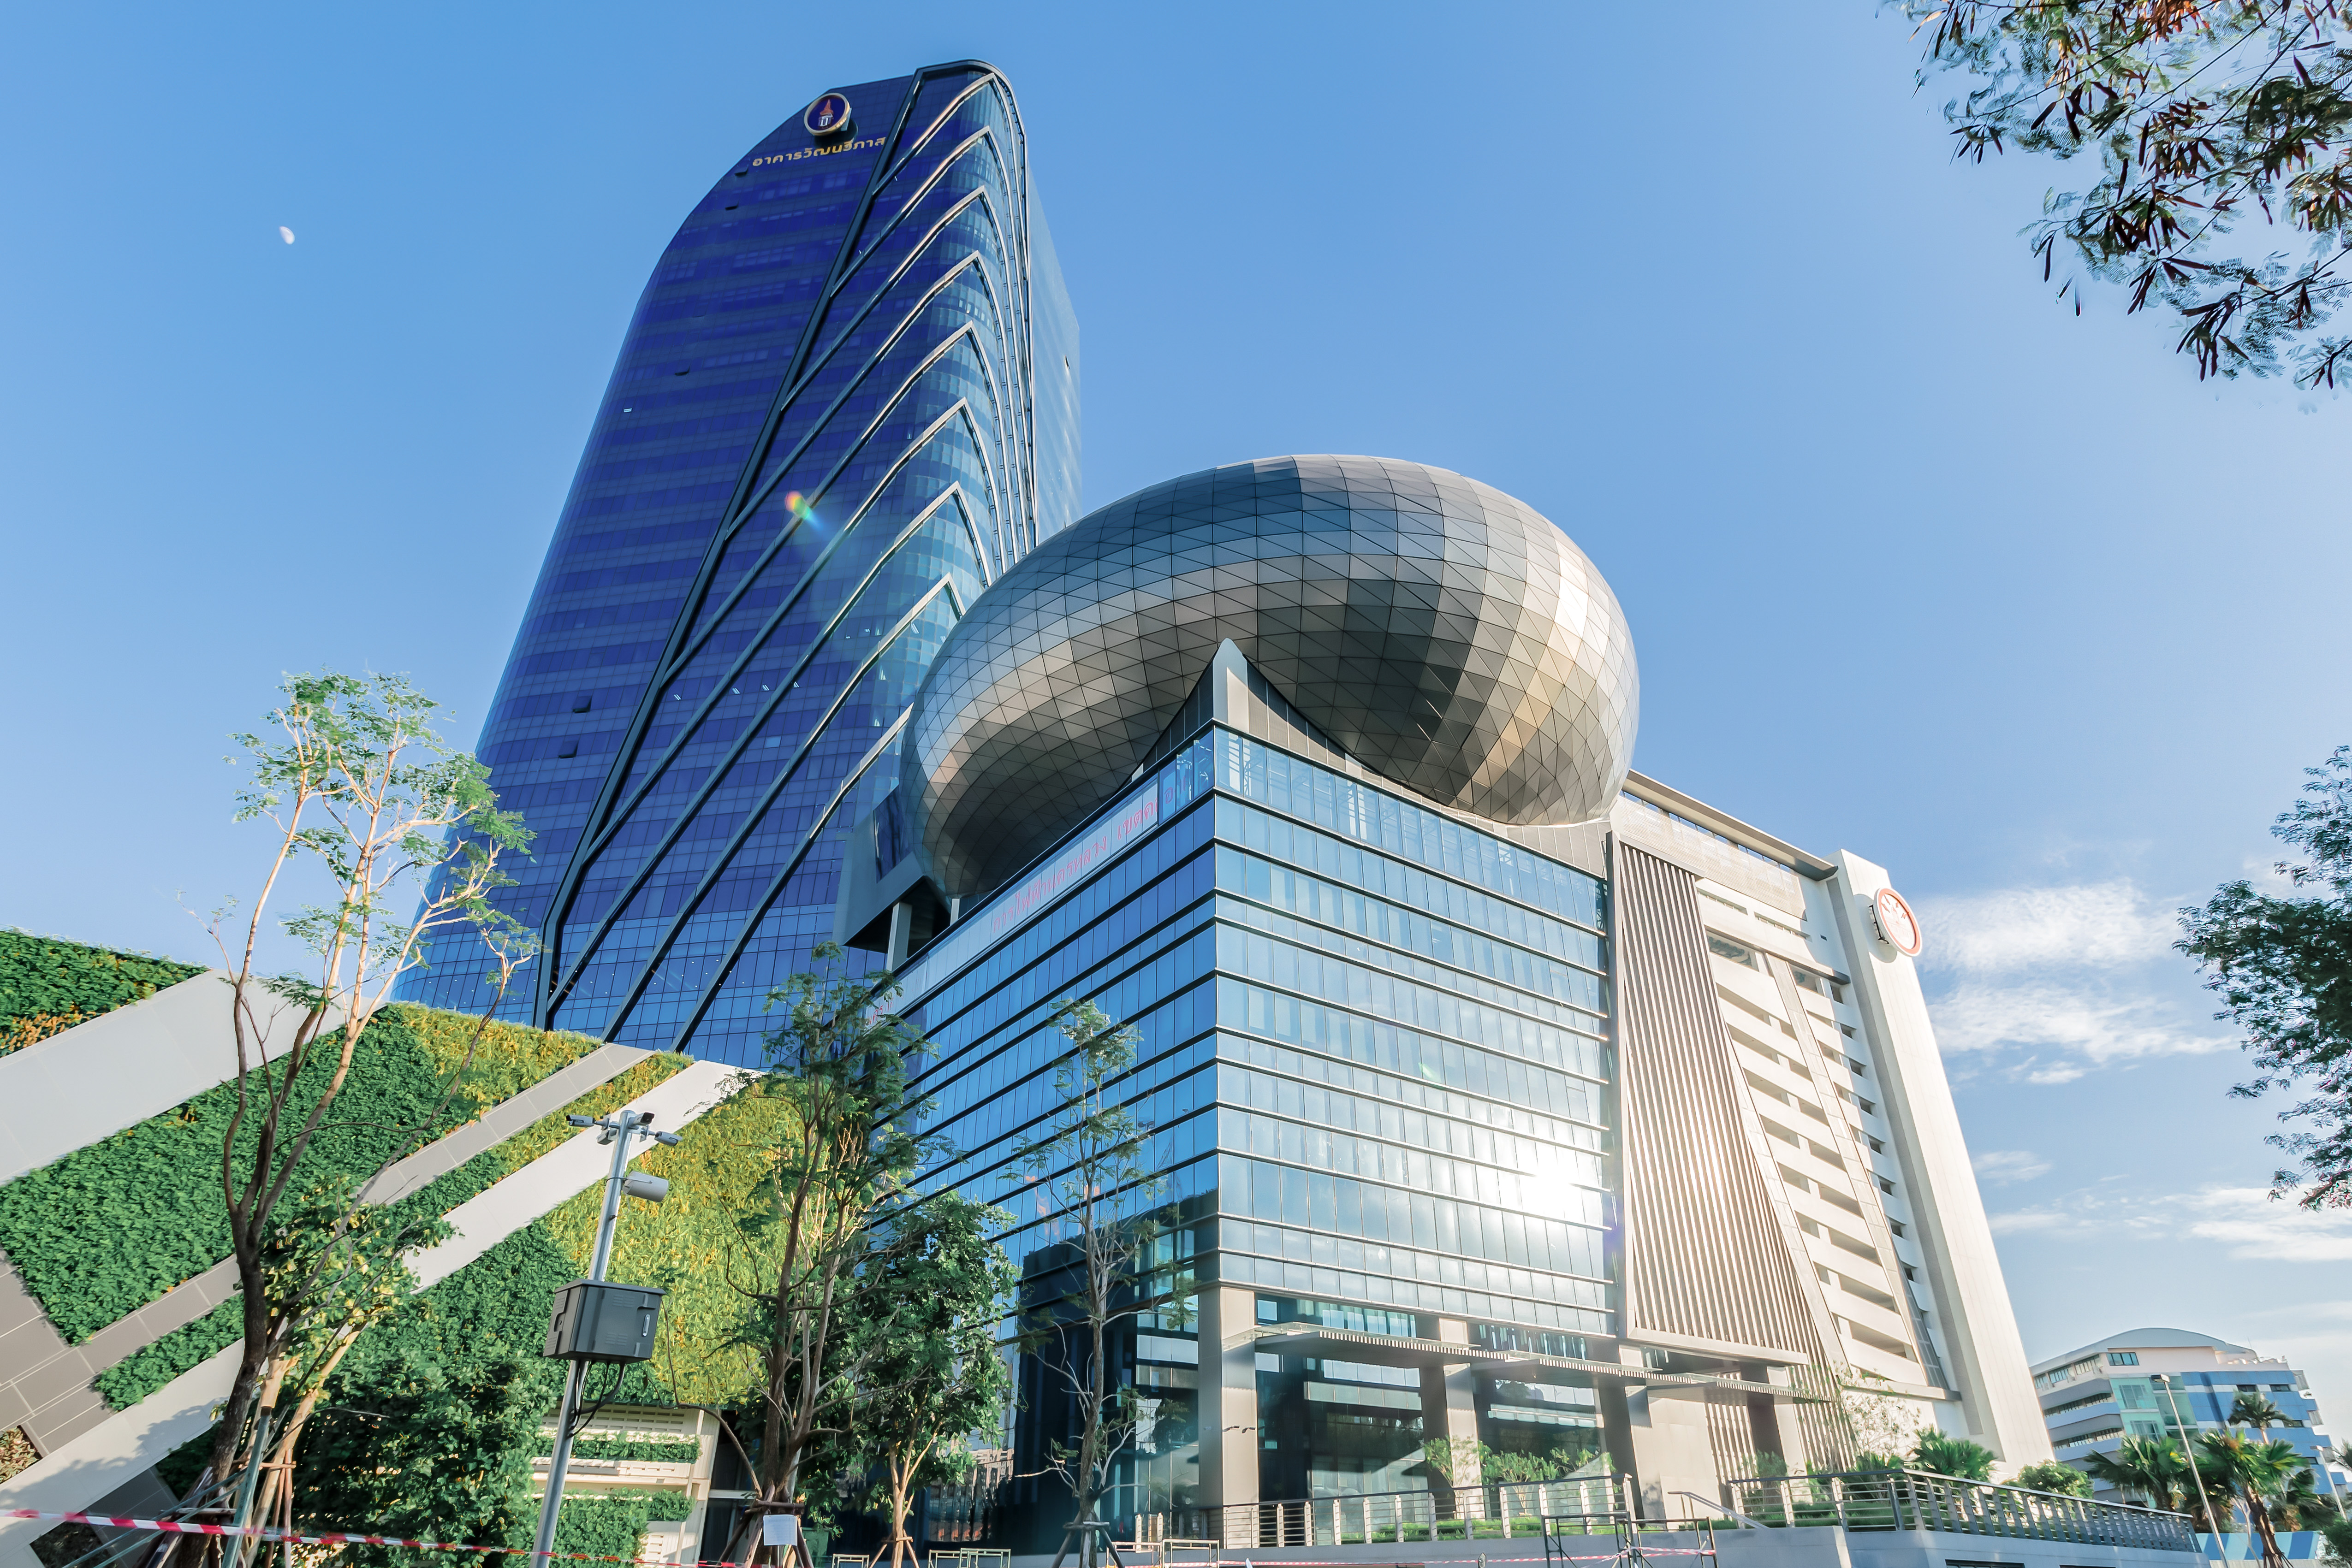 Thai Metropolitan Electricity Authority Elevates Its Meeting Spaces With World-Class HARMAN Professional Solutions Networked AV and Lighting Systems